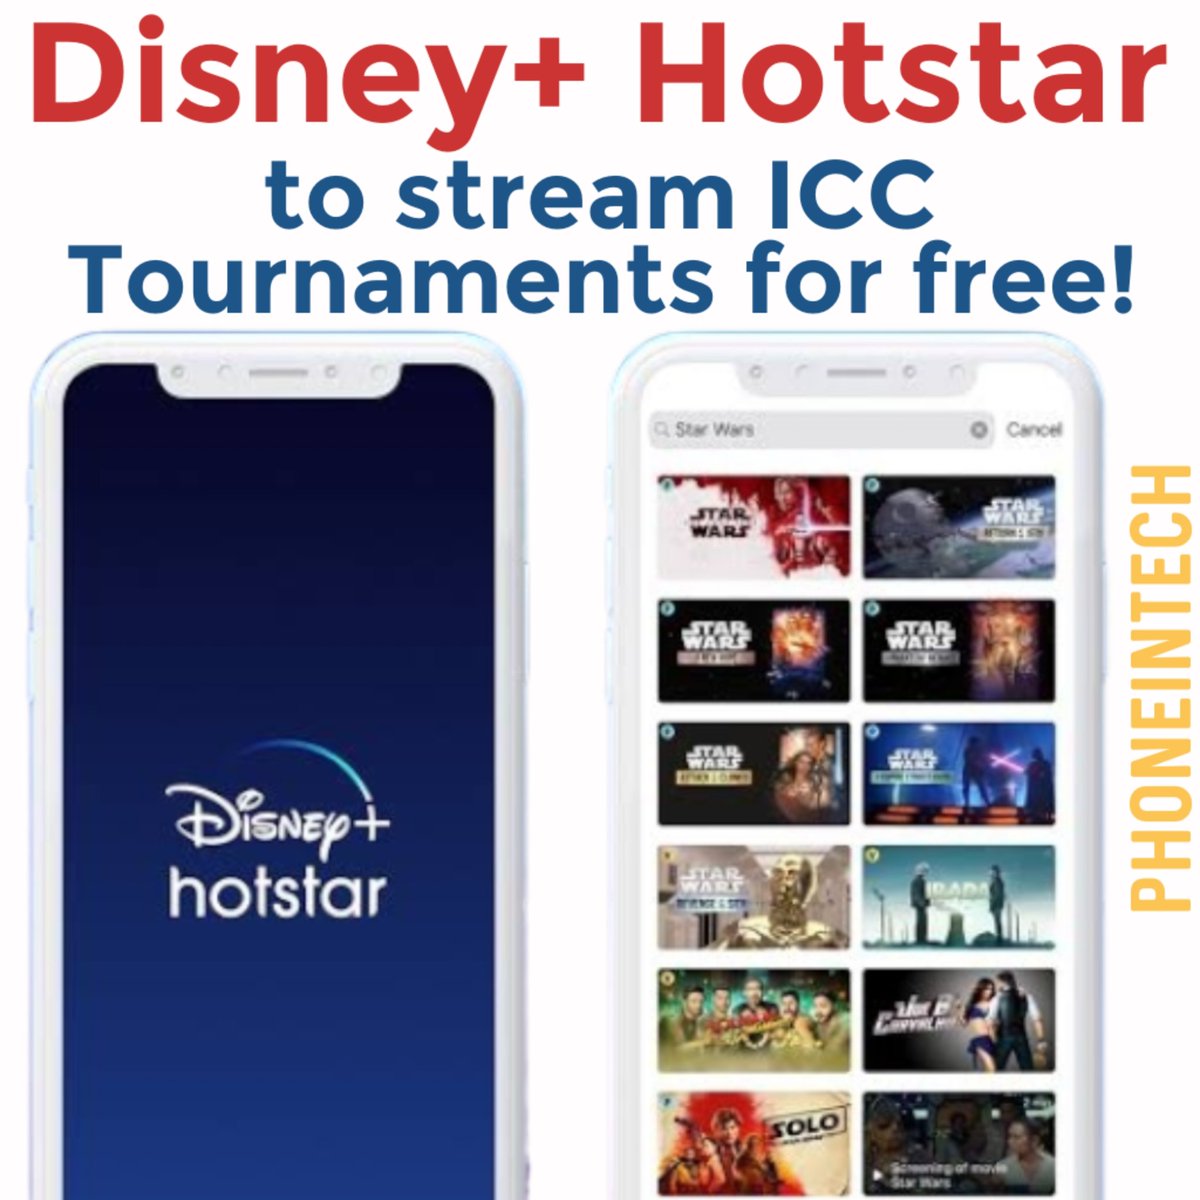 Disney+ Hotstar to stream ICC tournaments for free on its mobile app. This comes after Jio Cinema garnered over 13 million views in first few weeks of streaming.